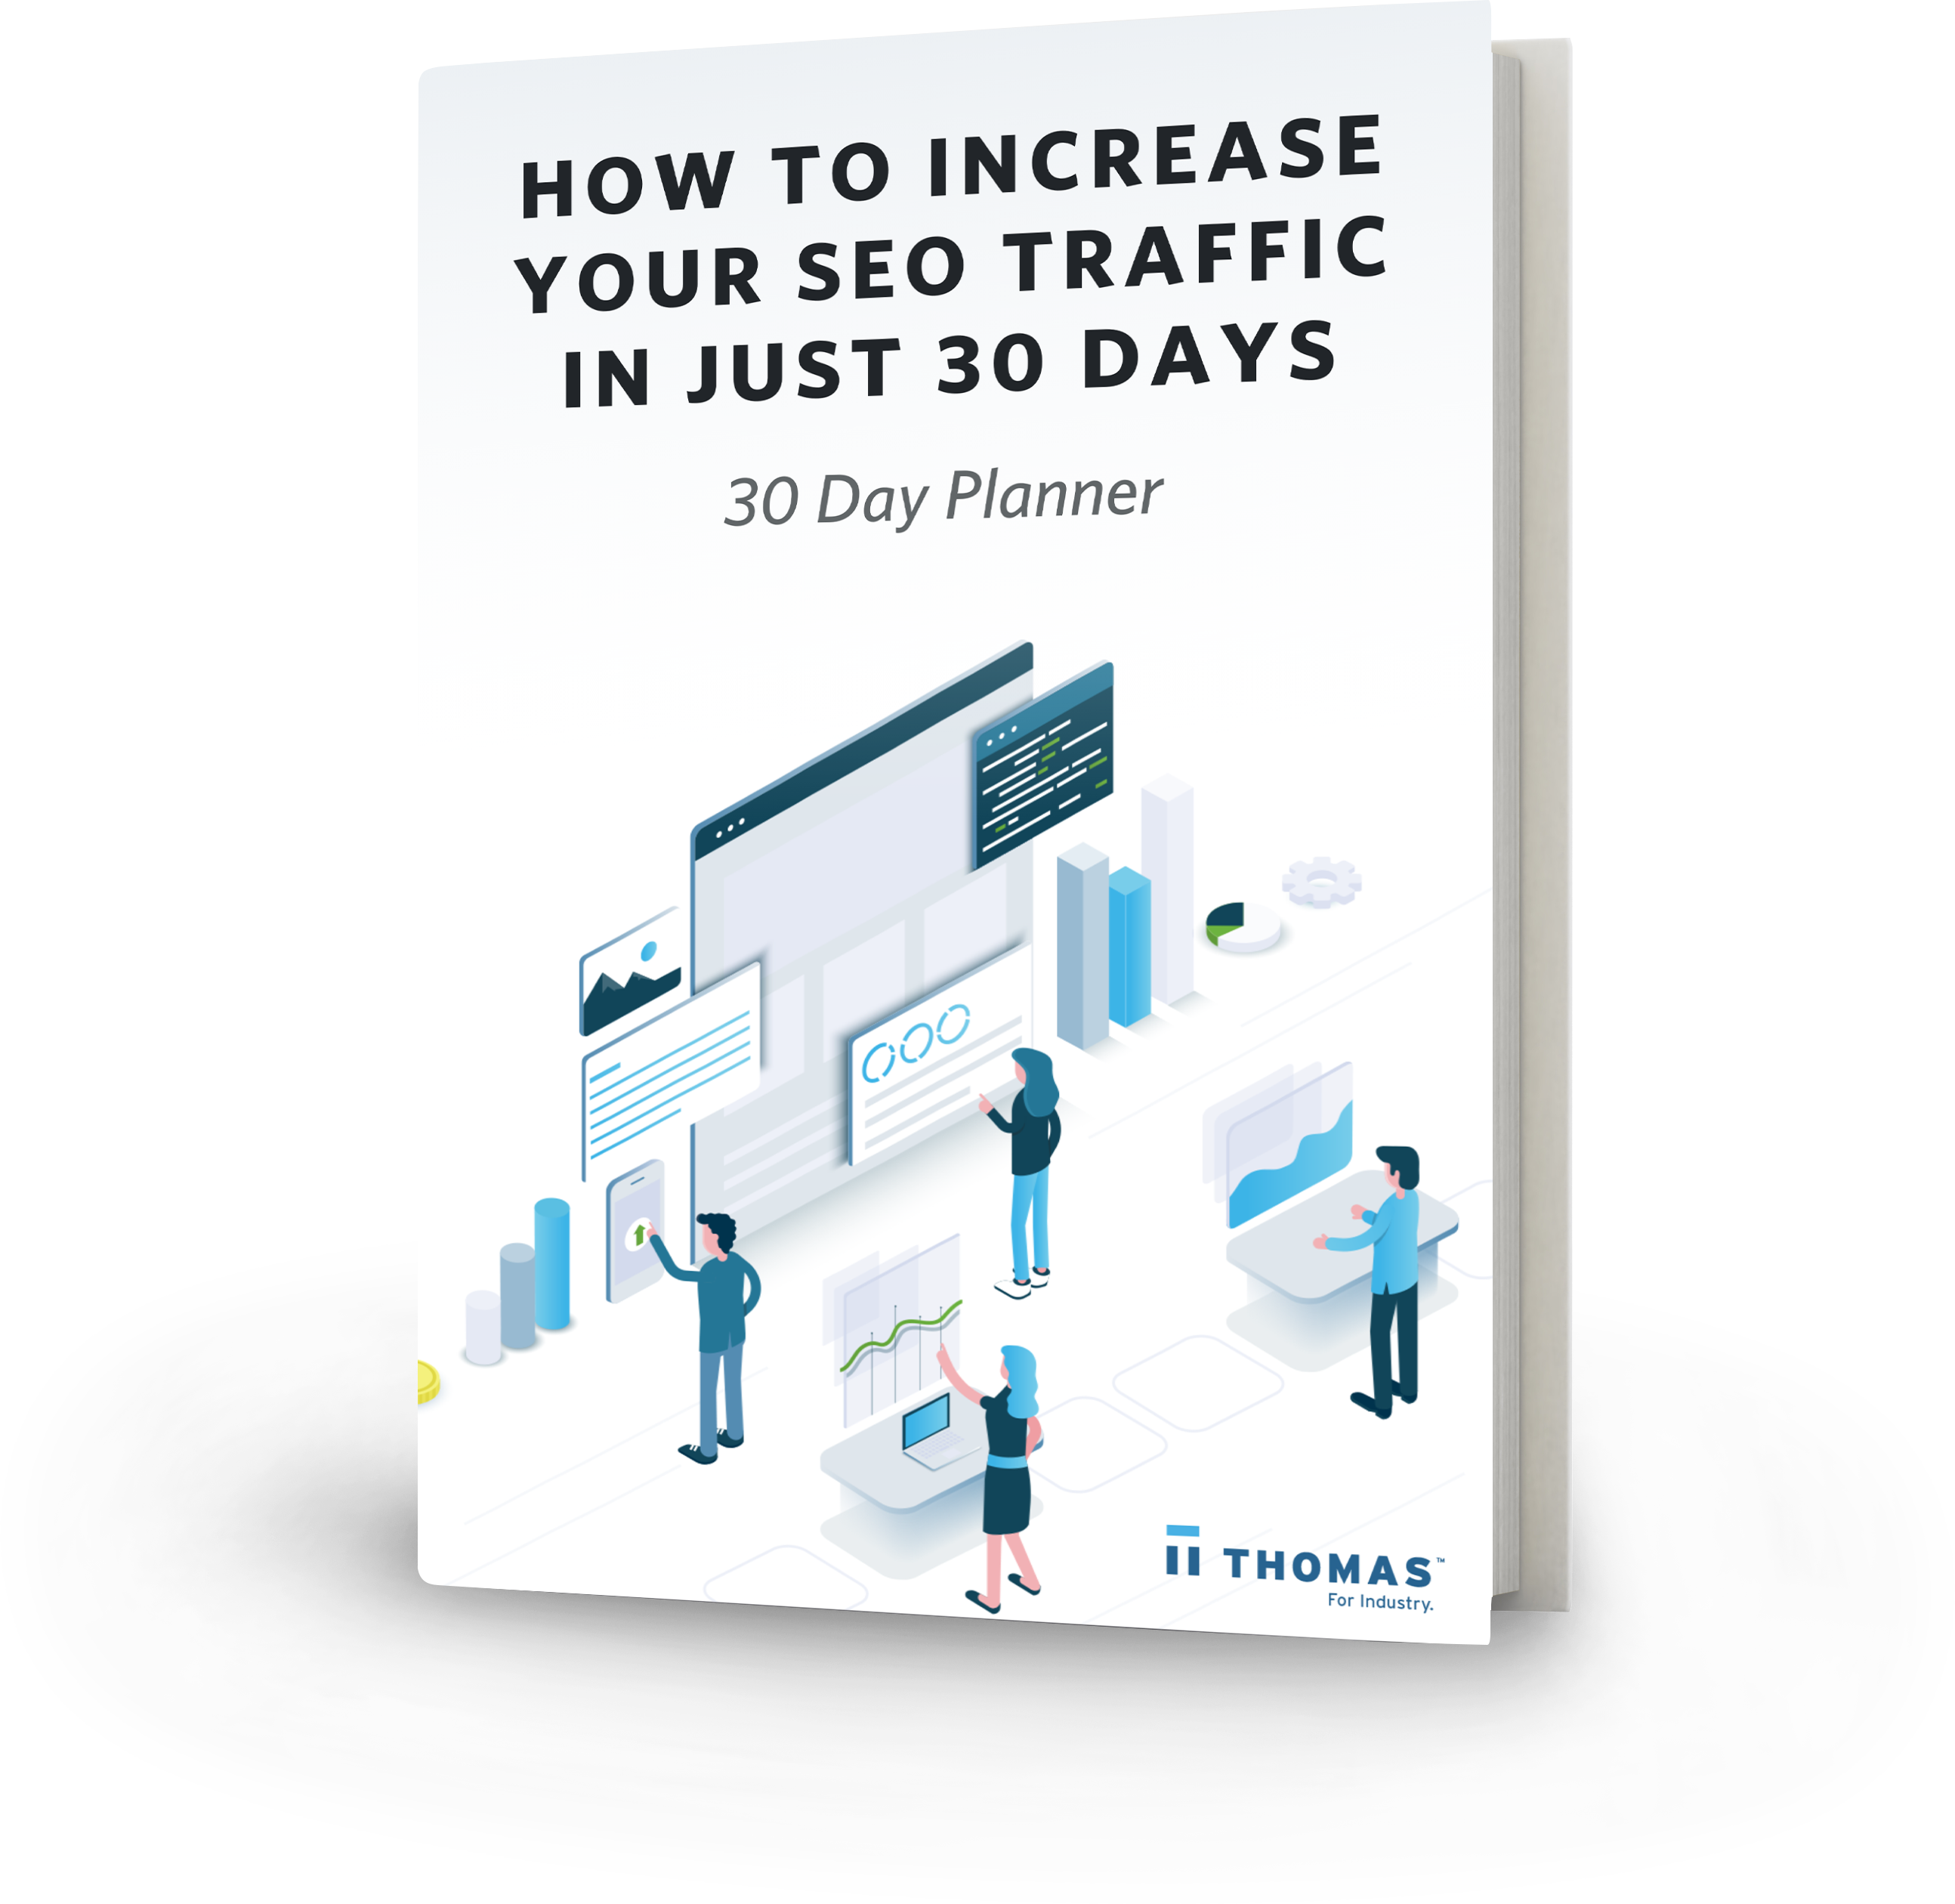 How To Increase Your SEO Traffic In Just 30 Days